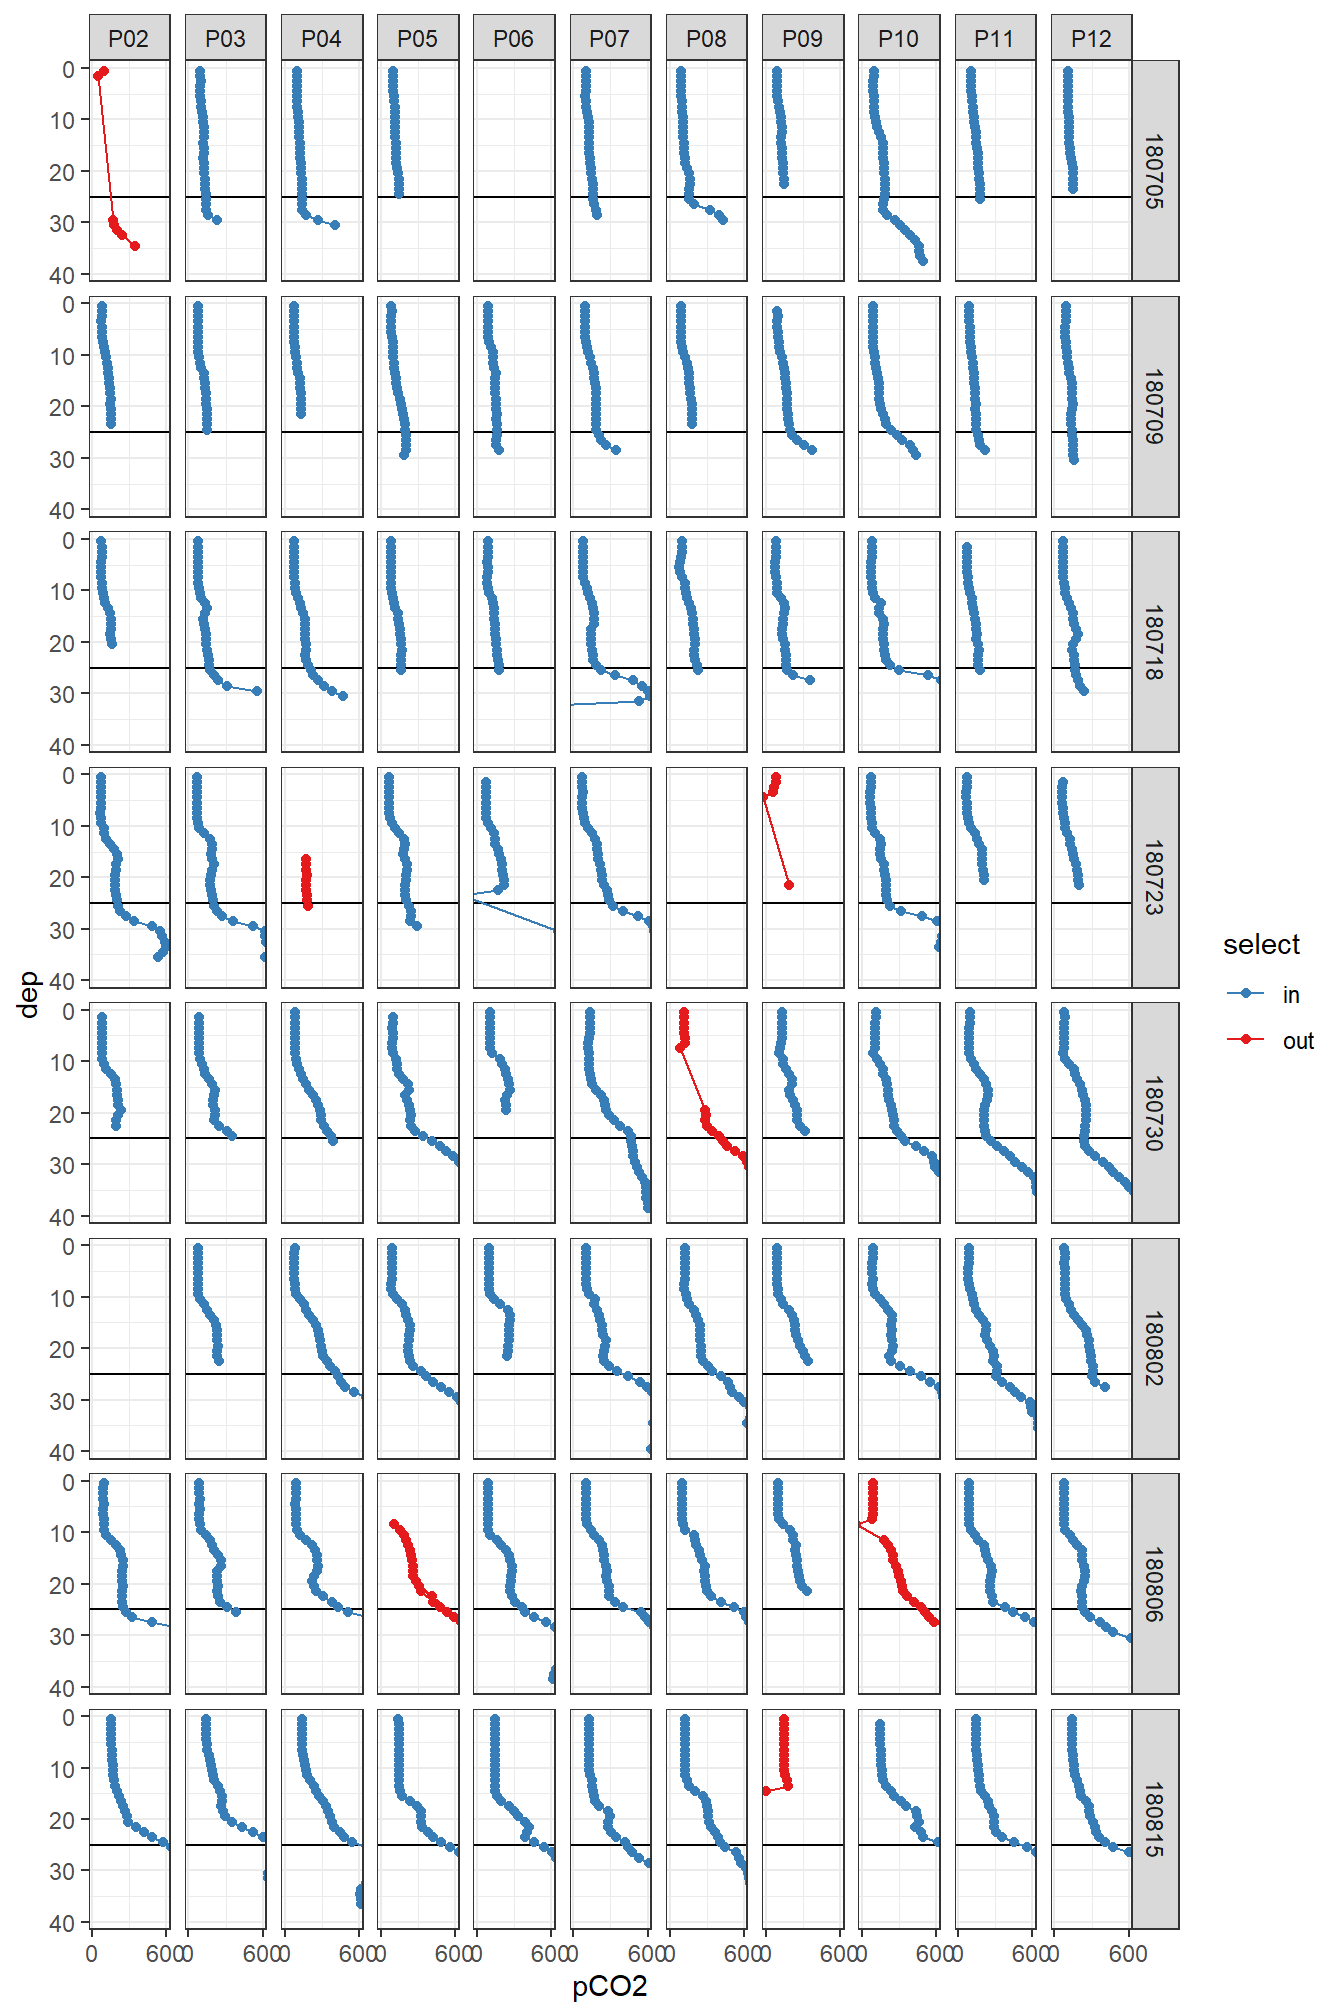 Overview pCO2 profiles at stations (P02-P12) and cruise dates (ID). y-axis restricted to displayed range.